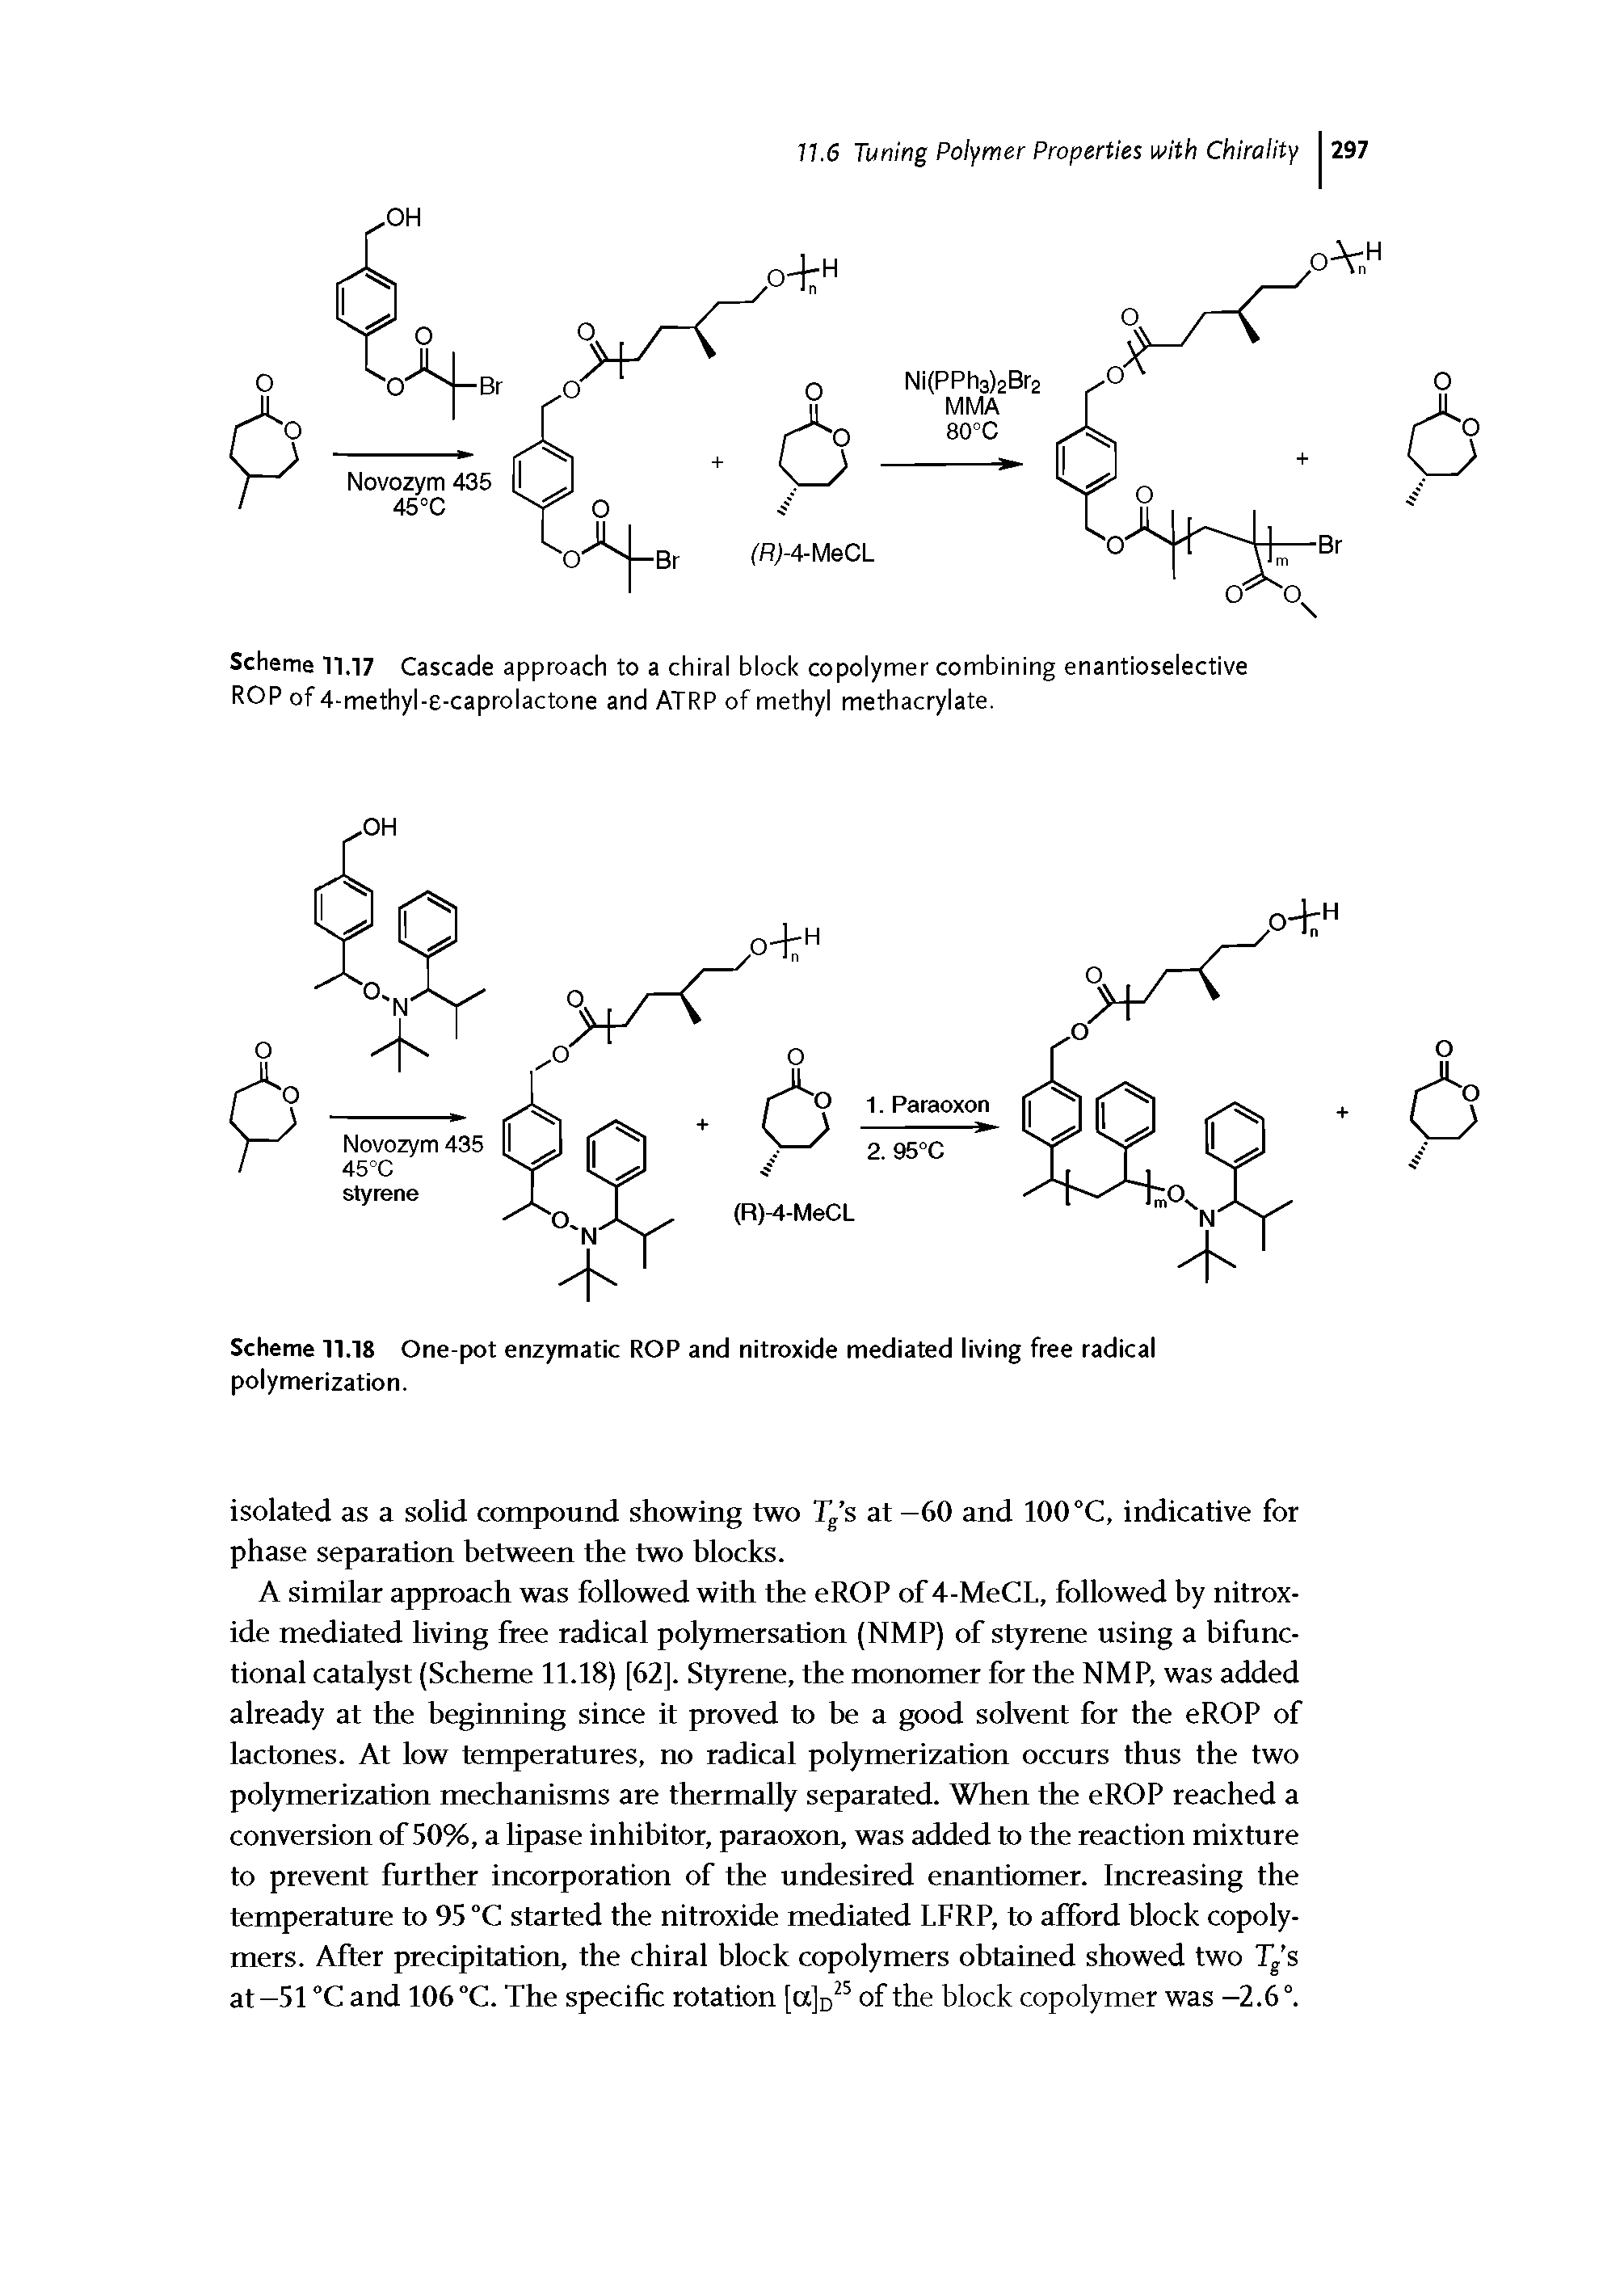 Scheme 11.17 Cascade approach to a chiral block copolymer combining enantioselective ROP of 4-methyl-e-caprolactone and ATRP of methyl methacrylate.